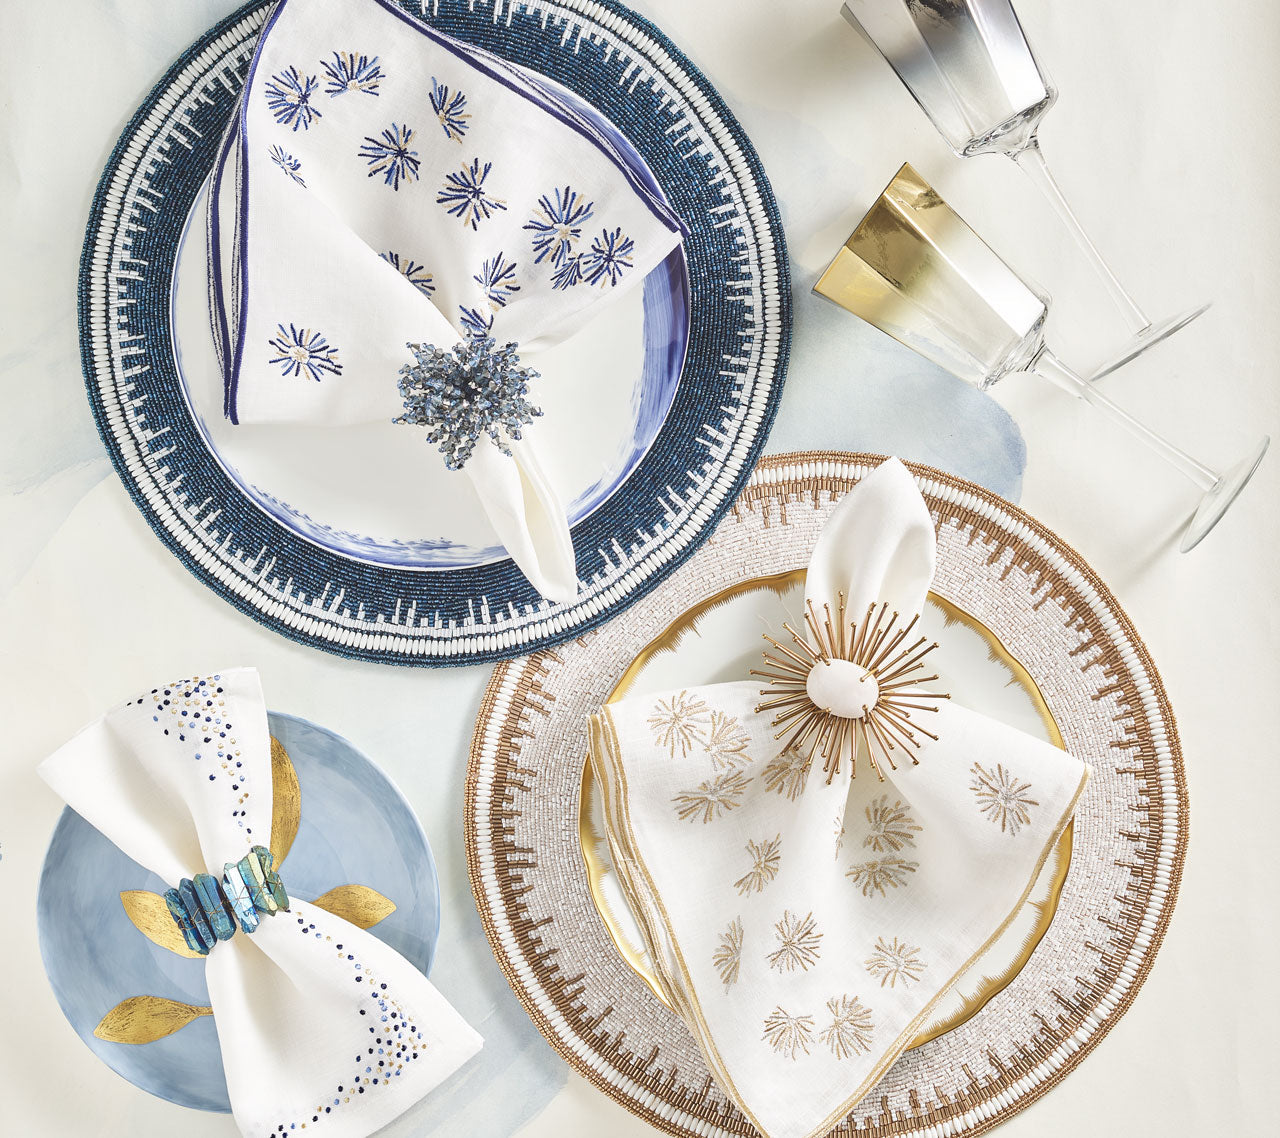 Kim Seybert's round beaded Enamor Placemats are an Elegant addition to your table setting.